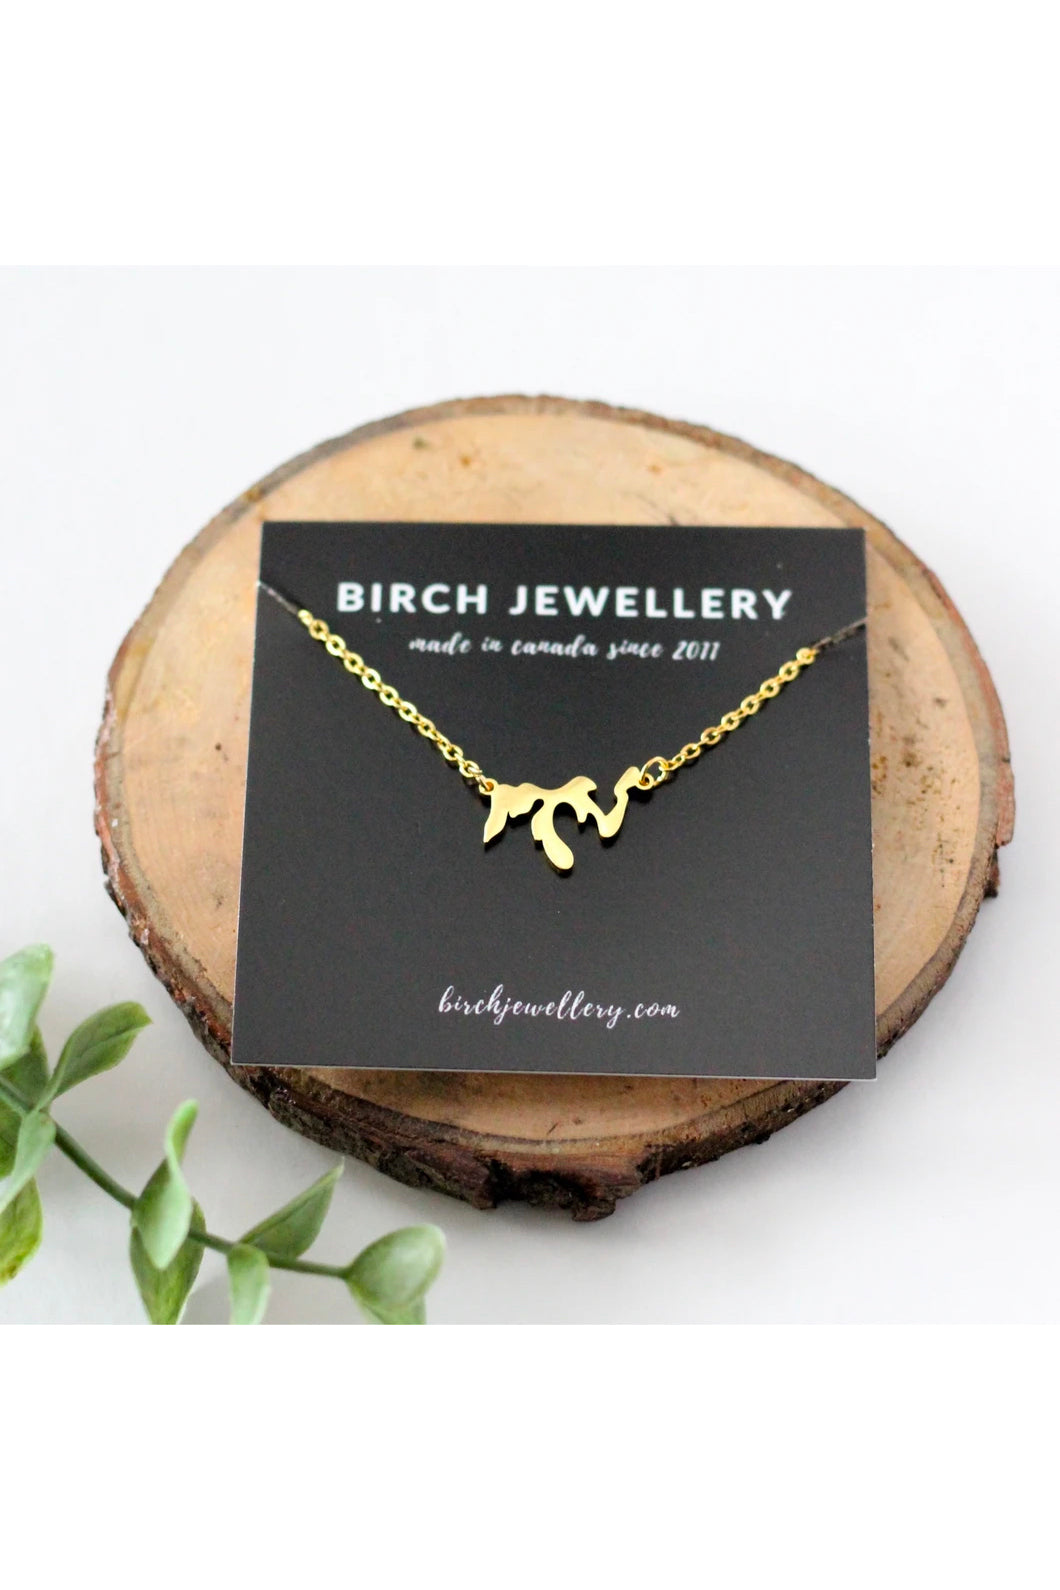 Great Lakes Necklace by Birch Jewellery, Gold-plated stainless steel, made in Ottawa